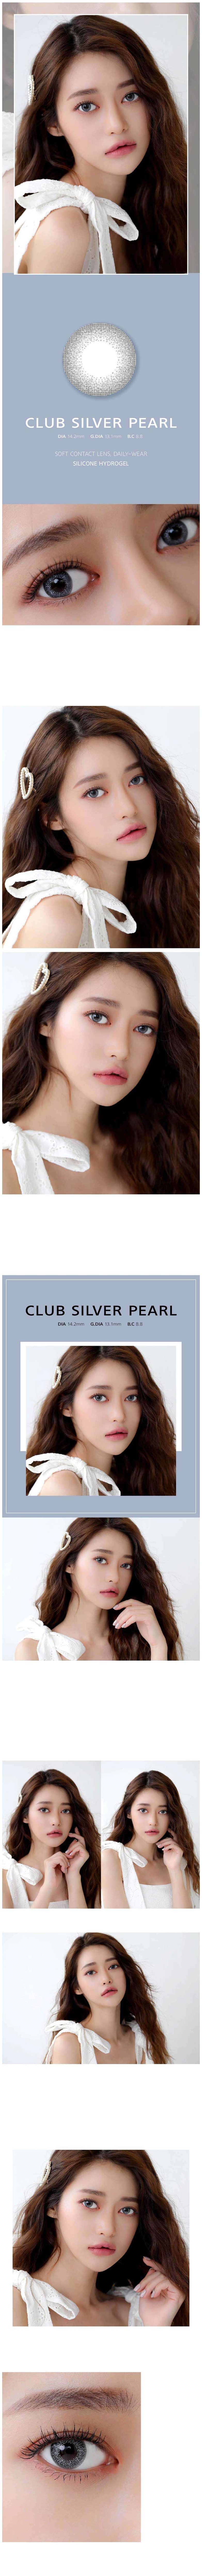 description-image-of-club-silver-pearl-grey-2pcs-monthly-colored-contacts.jpg